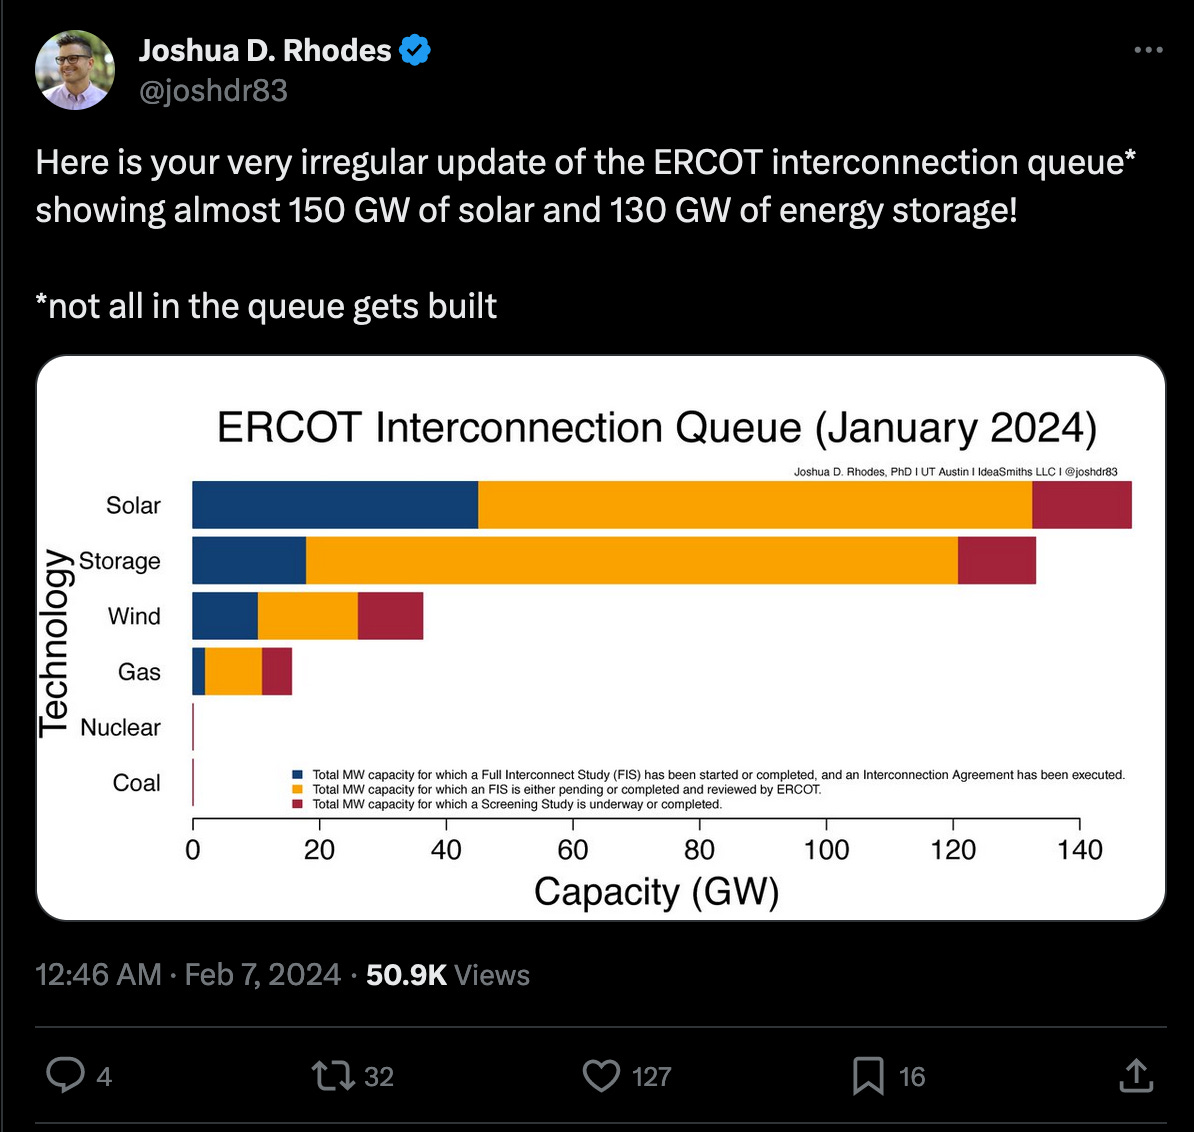 Tweet says: "Here is your very irregular update of the ERCOT interconnection queue* showing almost 150 GW of solar and 130 GW of energy storage!  *not all in the queue gets built".